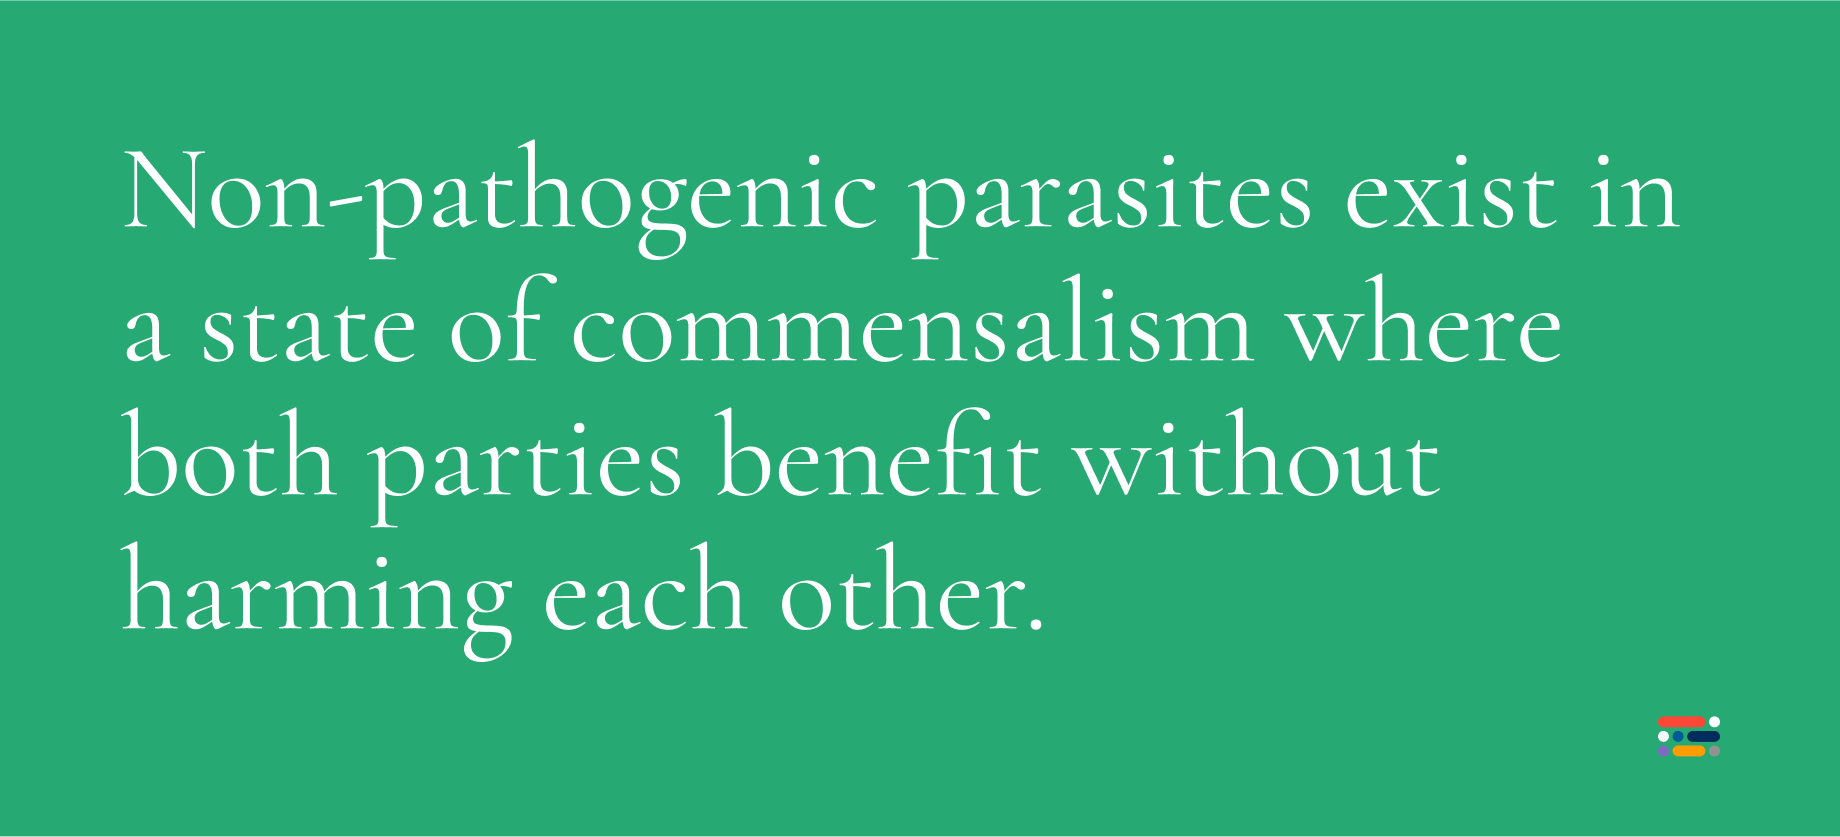 Non-pathogenic parasites exist in a state of commensalism where both parties benefit without harming each other.